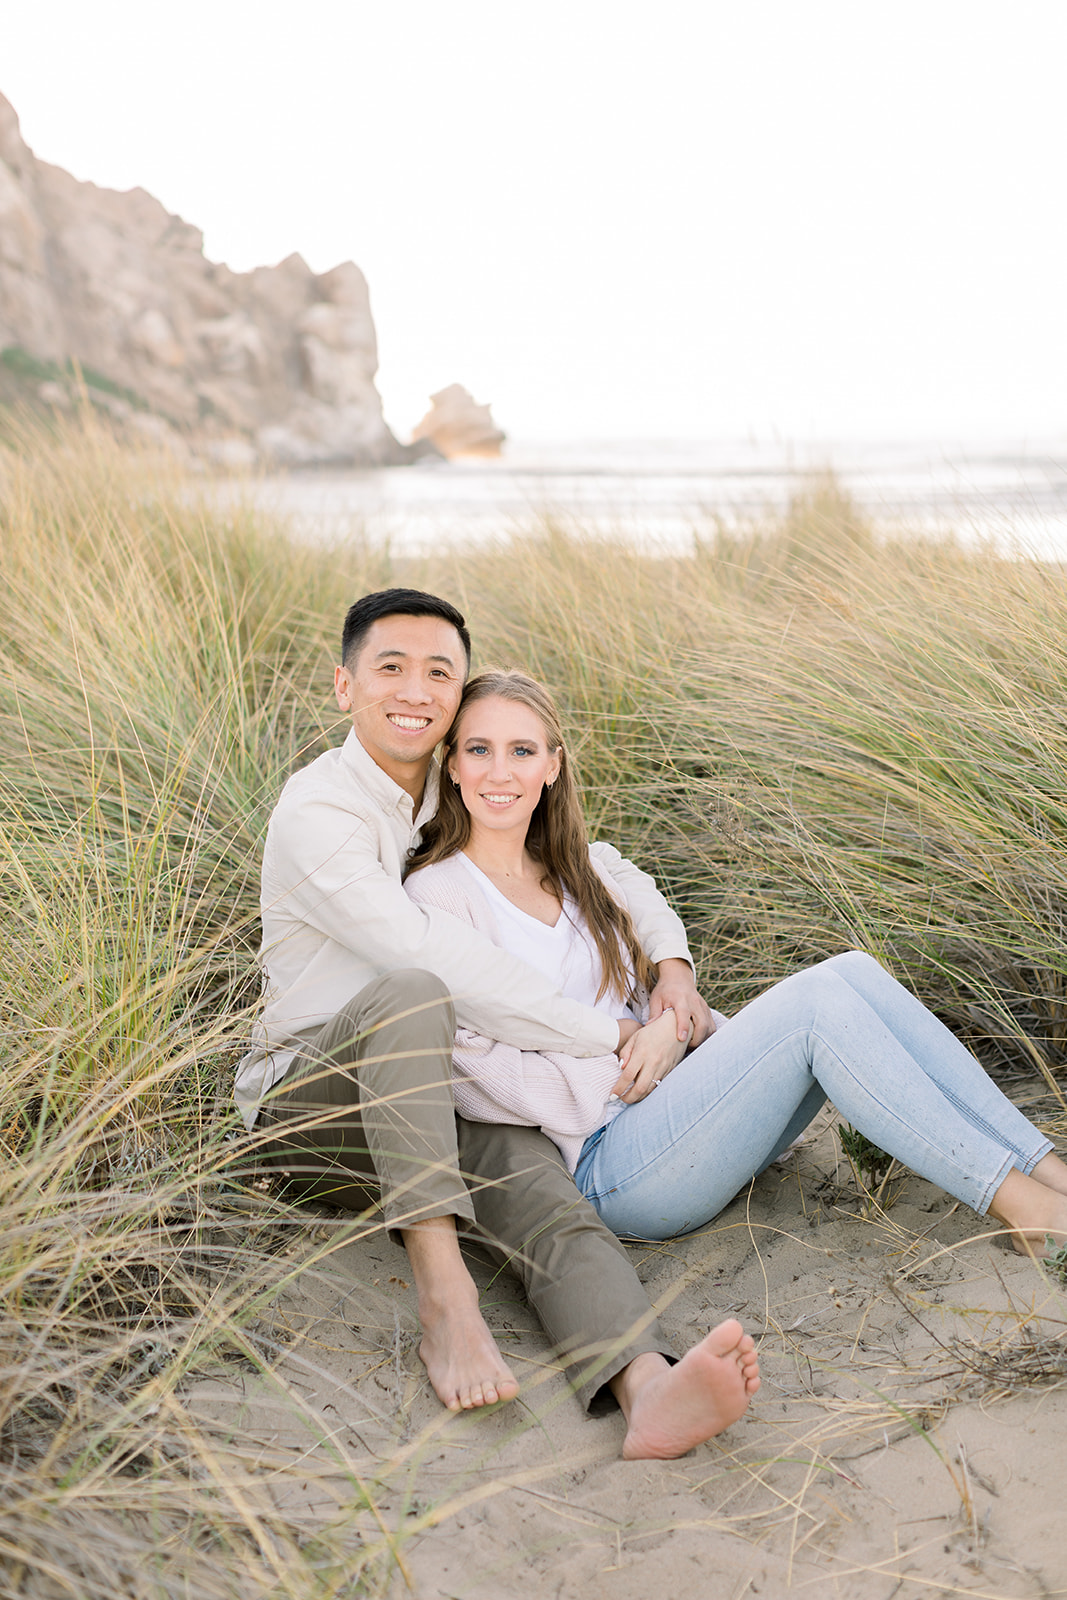 Engagement photos in morro bay